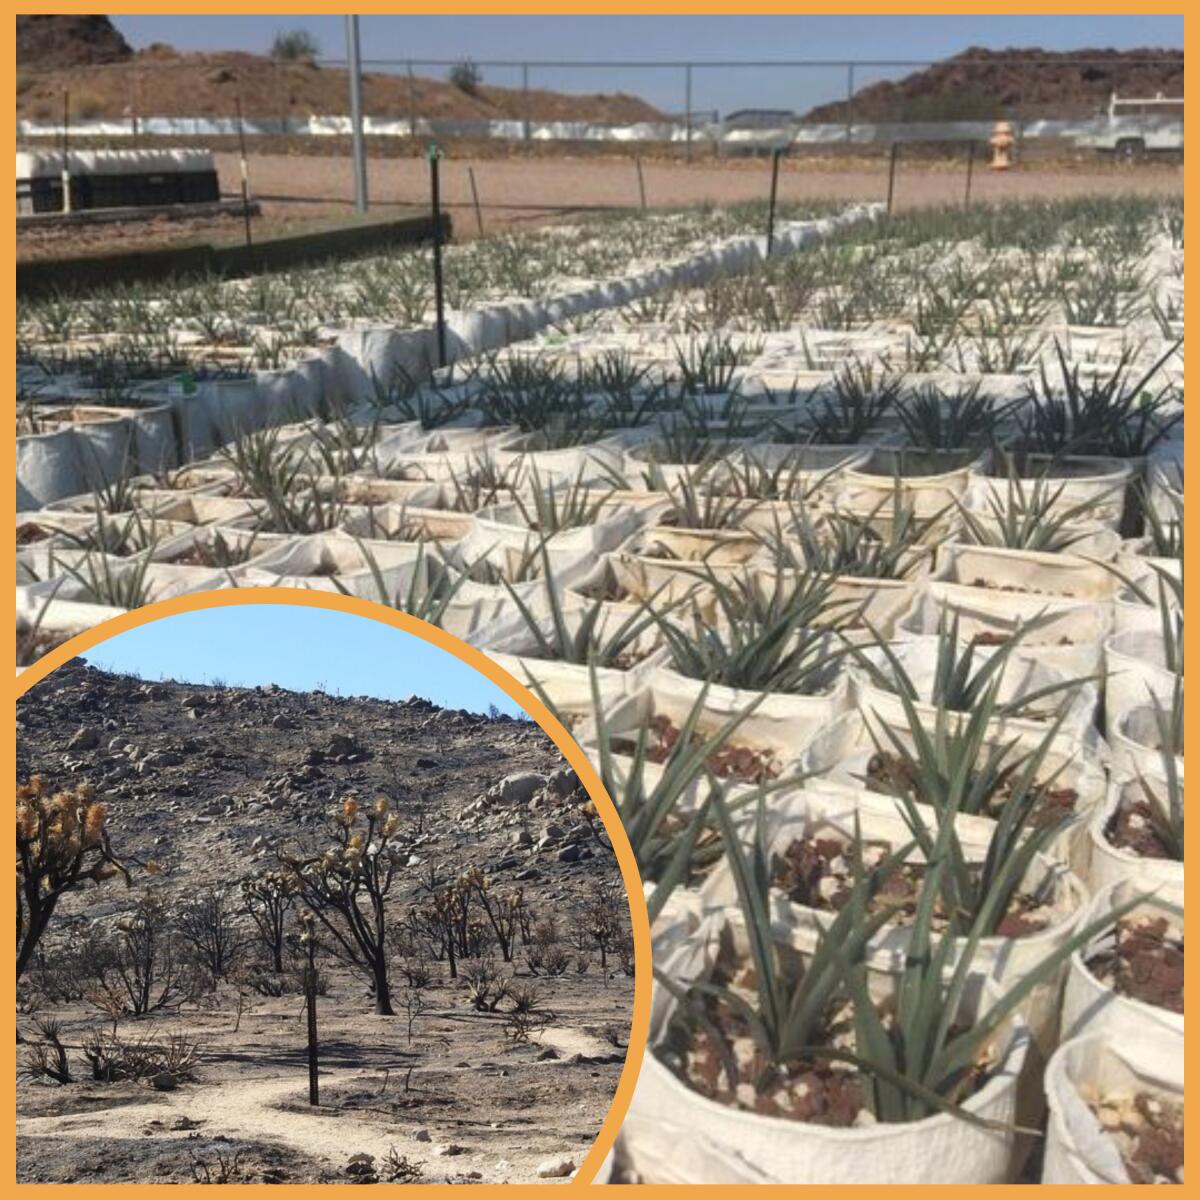 Baby Joshua trees are being grown to replant the burn area at Cima Dome in the Mojave National Preserve.